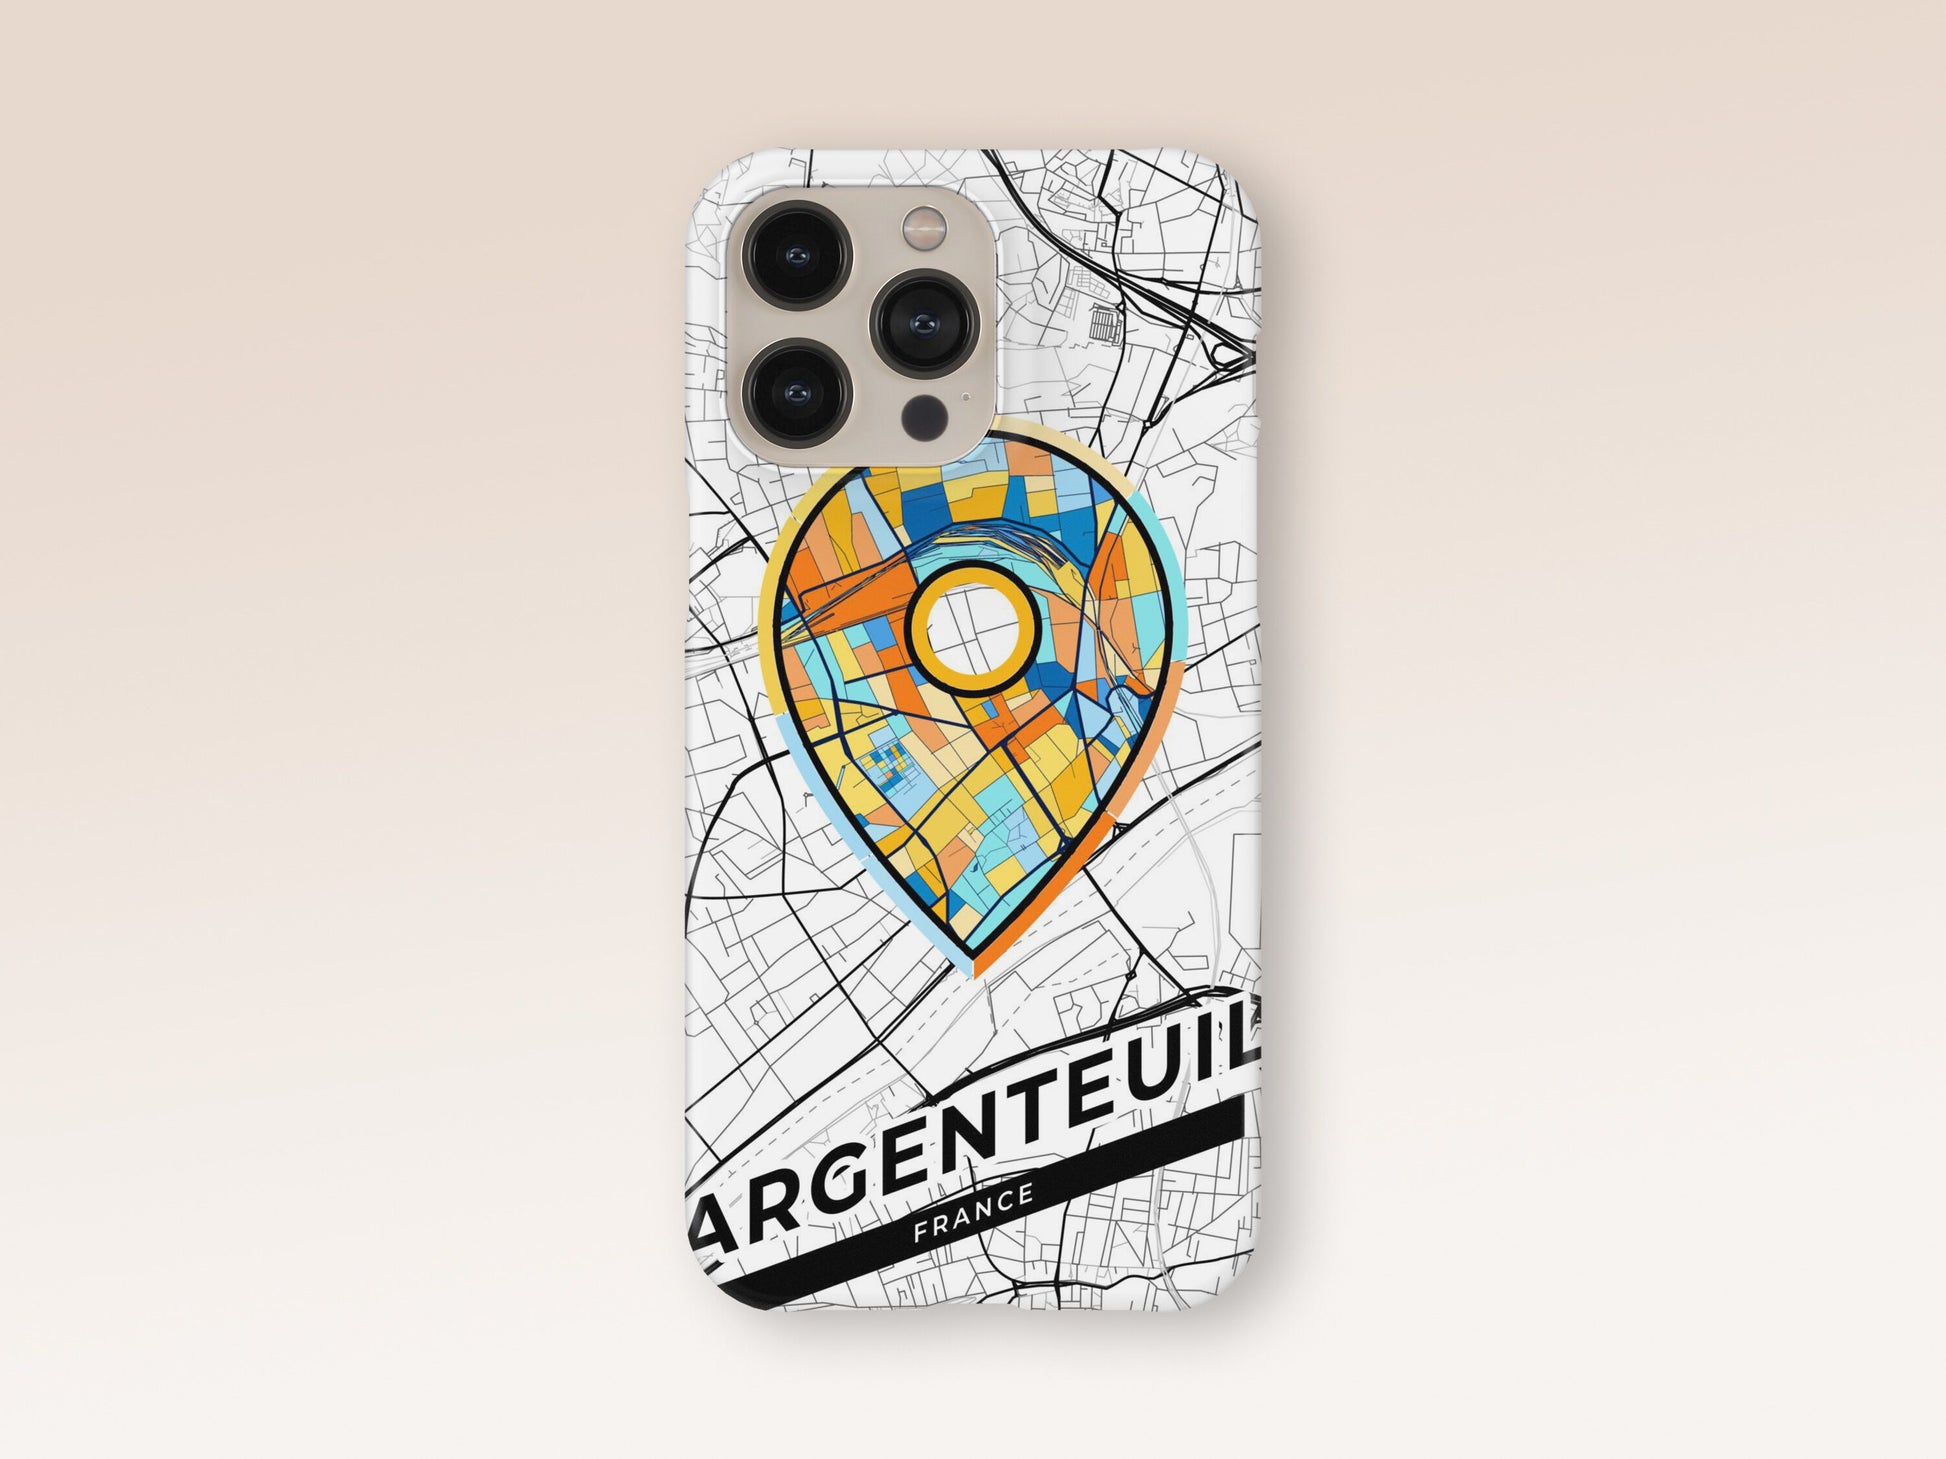 Argenteuil France slim phone case with colorful icon. Birthday, wedding or housewarming gift. Couple match cases. 1